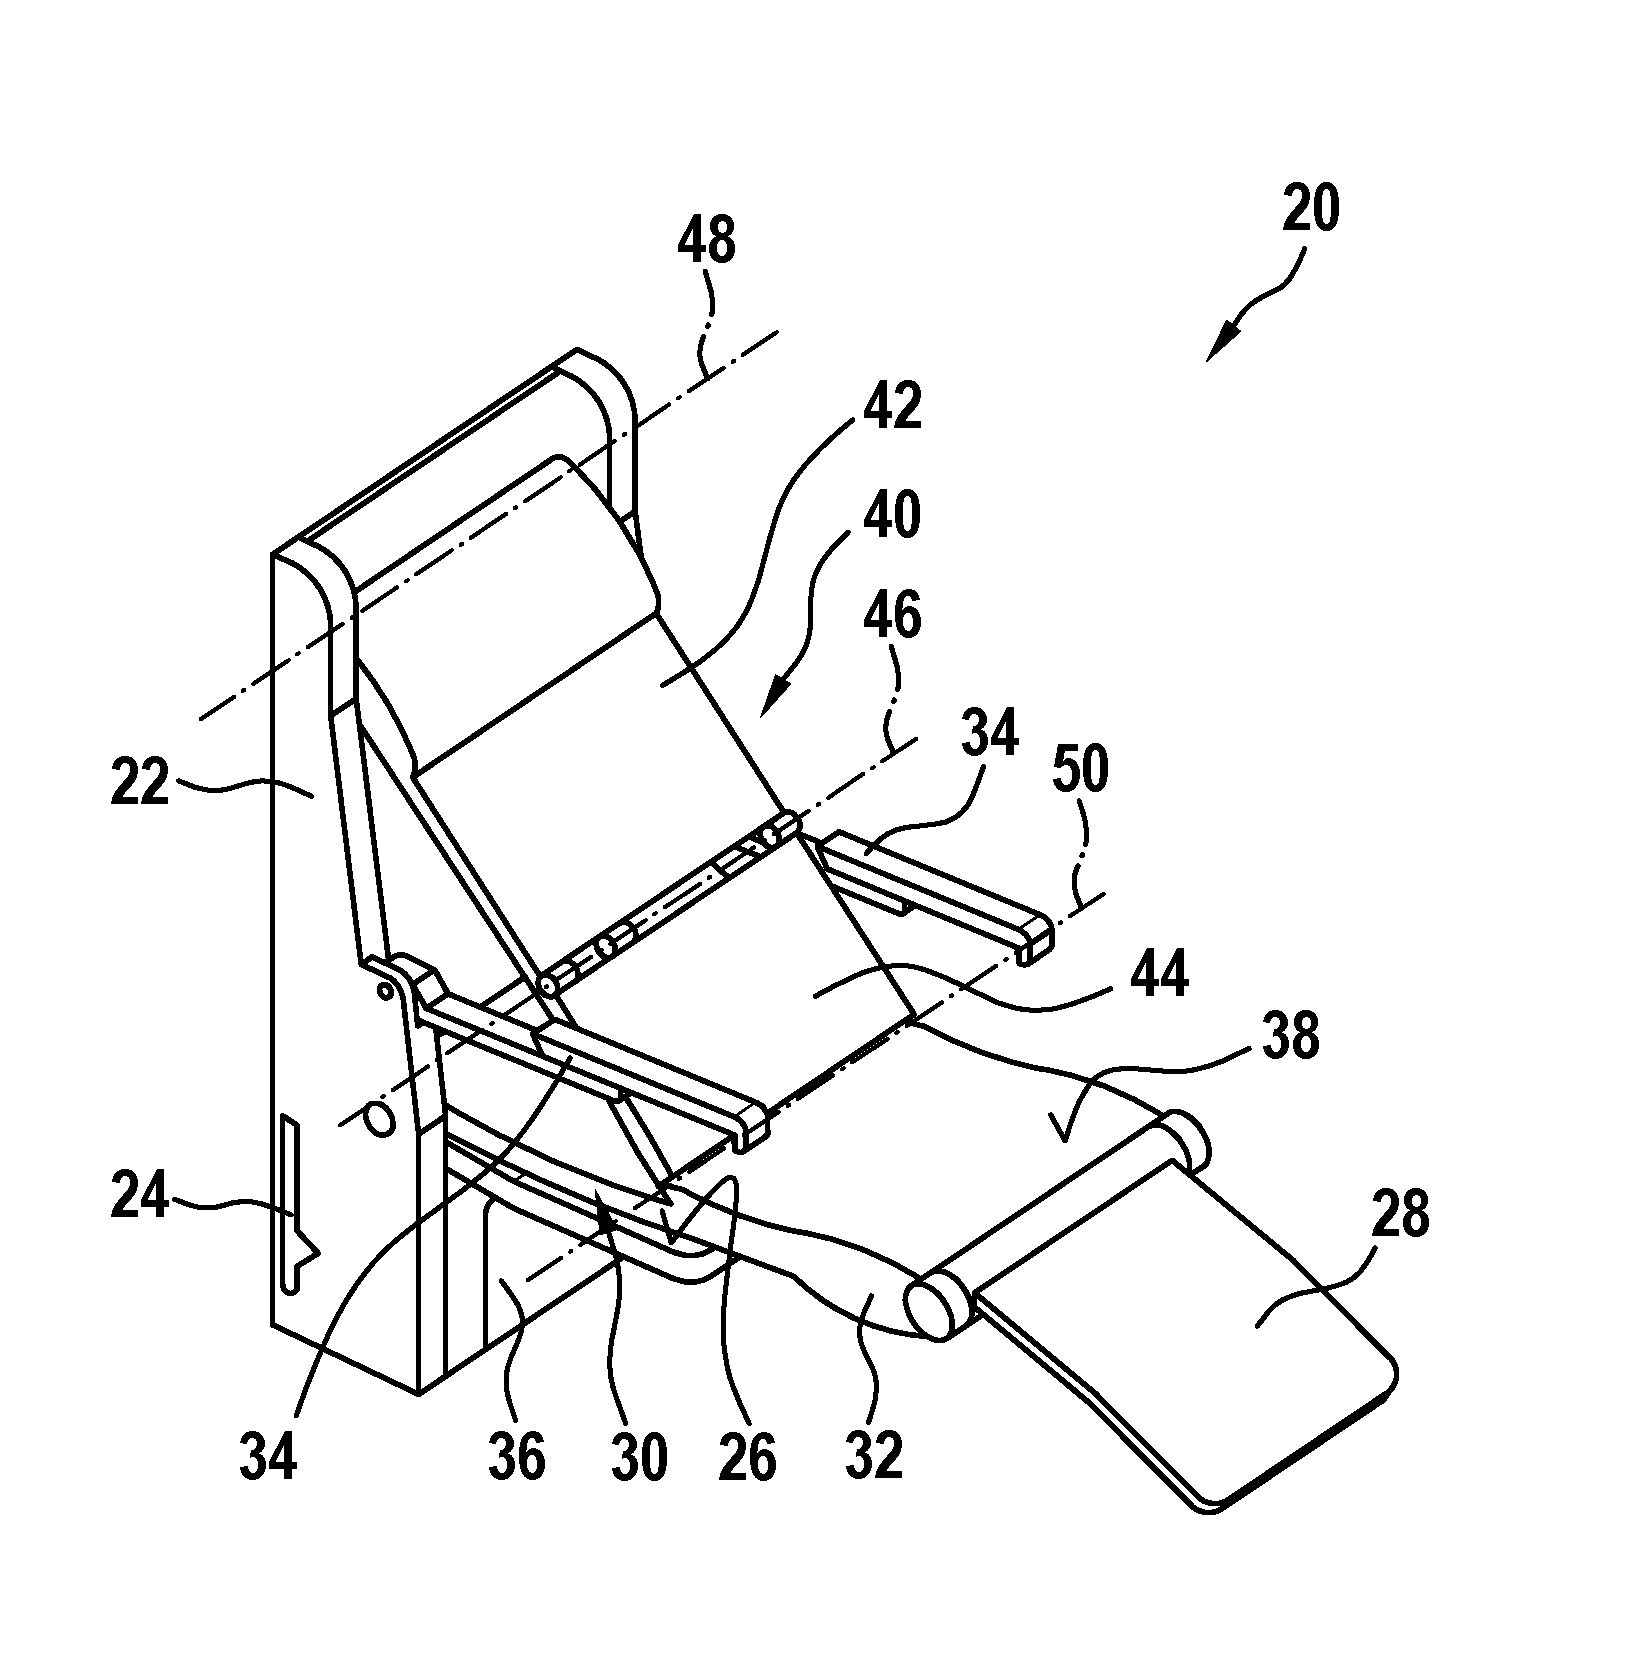 Aircraft Seat with Seating and Reclining Positions